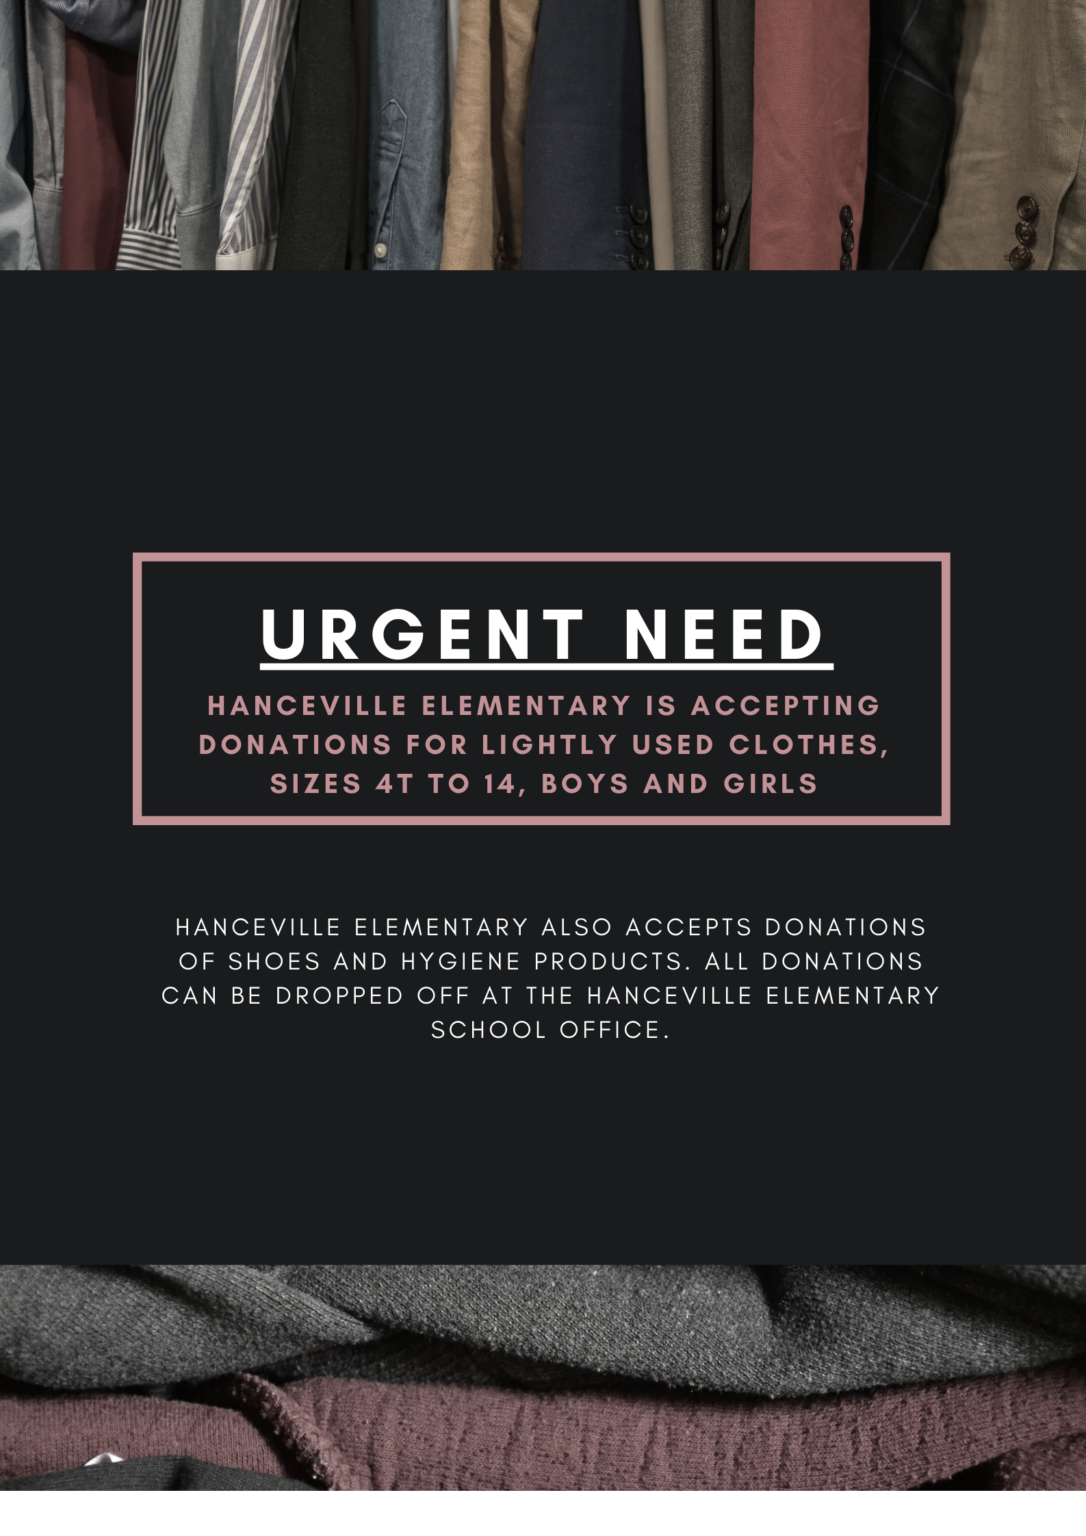 Urgent need for clothing at Hanceville Elementary - The Cullman Tribune